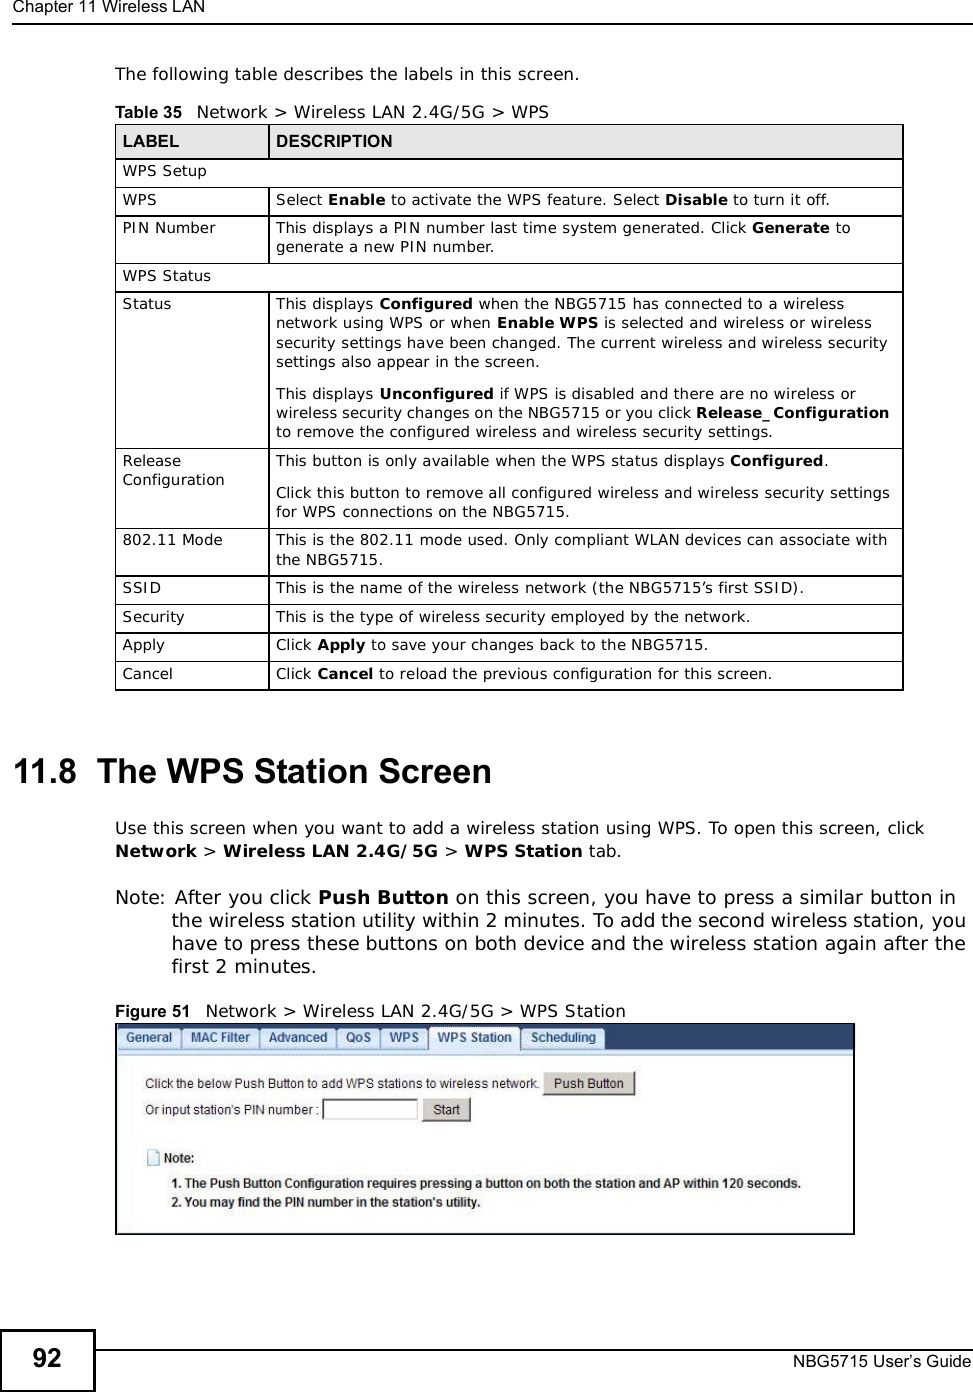 Chapter 11Wireless LANNBG5715 User’s Guide92The following table describes the labels in this screen.11.8  The WPS Station ScreenUse this screen when you want to add a wireless station using WPS. To open this screen, click Network &gt; Wireless LAN 2.4G/5G &gt; WPS Station tab.Note: After you click Push Button on this screen, you have to press a similar button in the wireless station utility within 2 minutes. To add the second wireless station, you have to press these buttons on both device and the wireless station again after the first 2 minutes.Figure 51   Network &gt; Wireless LAN 2.4G/5G &gt; WPS StationTable 35   Network &gt; Wireless LAN 2.4G/5G &gt; WPSLABEL DESCRIPTIONWPS SetupWPS Select Enable to activate the WPS feature. Select Disable to turn it off.PIN Number This displays a PIN number last time system generated. Click Generate to generate a new PIN number.WPS StatusStatus This displays Configured when the NBG5715 has connected to a wireless network using WPS or when Enable WPS is selected and wireless or wireless security settings have been changed. The current wireless and wireless security settings also appear in the screen.This displays Unconfigured if WPS is disabled and there are no wireless or wireless security changes on the NBG5715 or you click Release_Configurationto remove the configured wireless and wireless security settings.Release Configuration This button is only available when the WPS status displays Configured.Click this button to remove all configured wireless and wireless security settings for WPS connections on the NBG5715.802.11 Mode This is the 802.11 mode used. Only compliant WLAN devices can associate with the NBG5715.SSID This is the name of the wireless network (the NBG5715’s first SSID).Security This is the type of wireless security employed by the network.Apply Click Apply to save your changes back to the NBG5715.Cancel Click Cancel to reload the previous configuration for this screen.